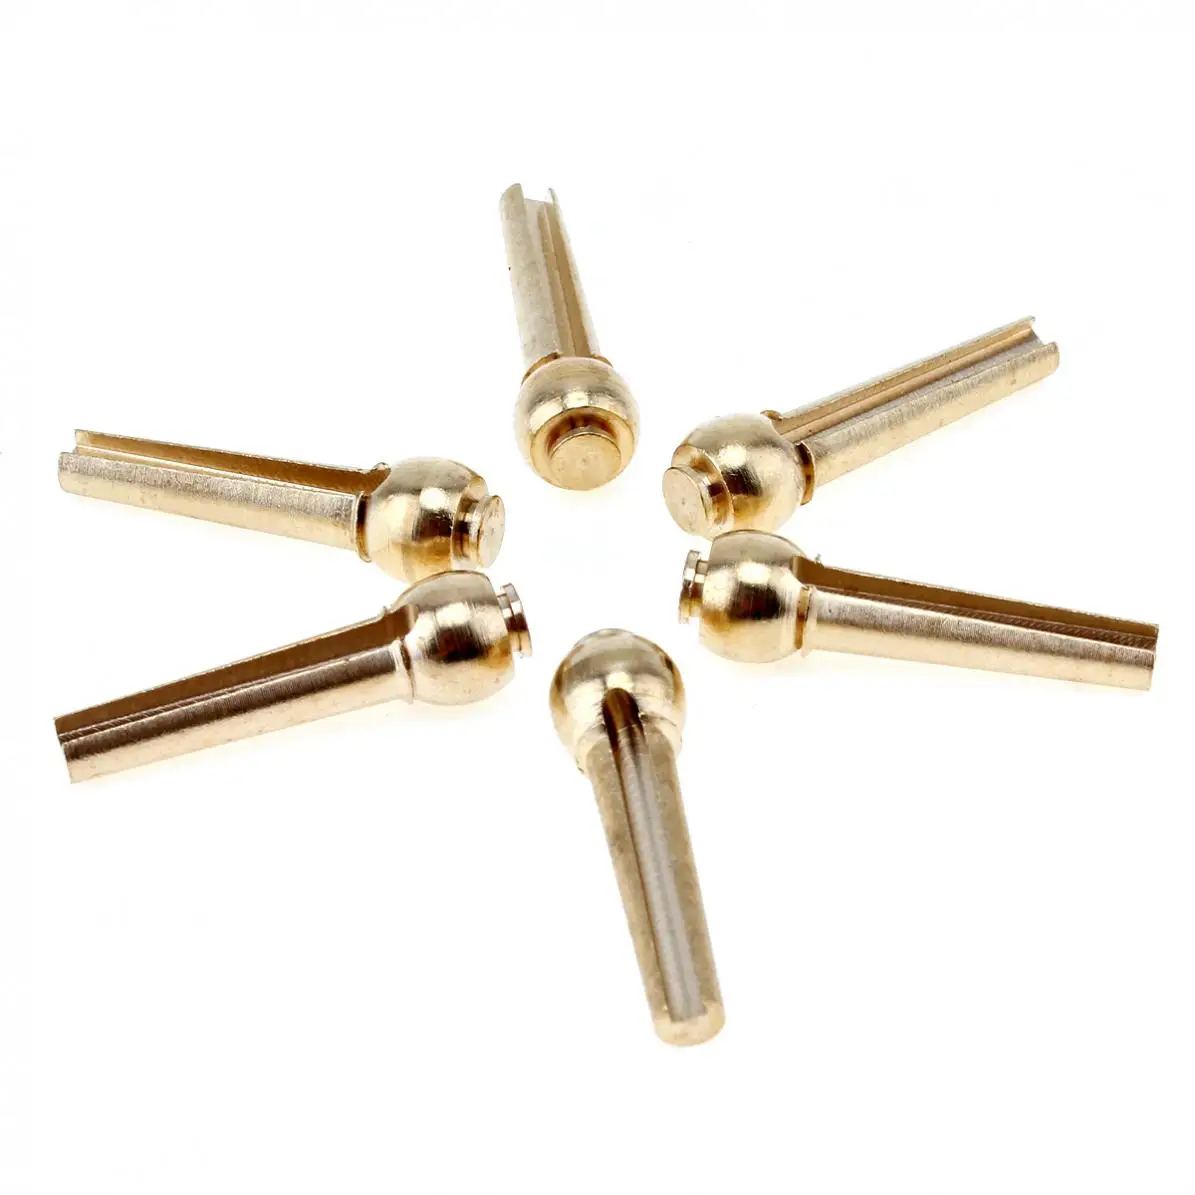 

6pcs/set Pure Copper Brass Guitar Bridge Pin Strings Nail Pegs for Folk Acoustic Guitar Keep Full Timbre More Stable